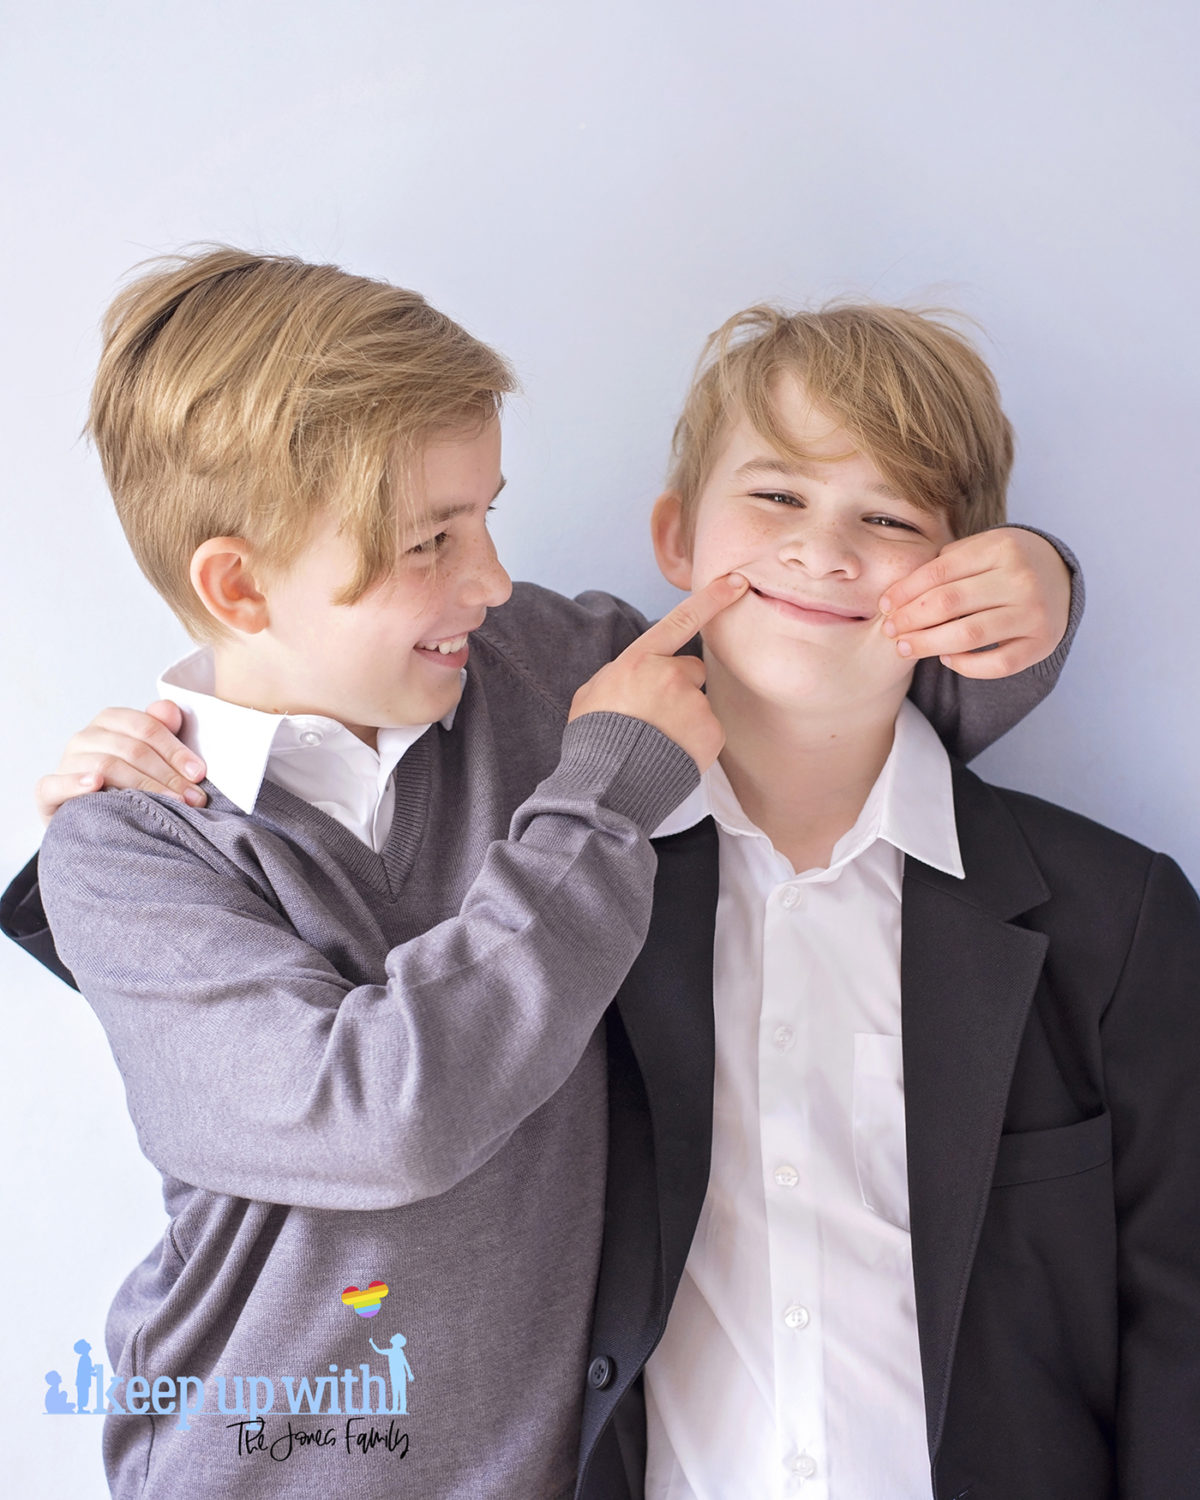 Image shows two boys wearing Trutex School Uniform. Black blazer, grey v-neck pullover and white shirt. Image by Sara-Jayne for Keep Up With The Jones Family